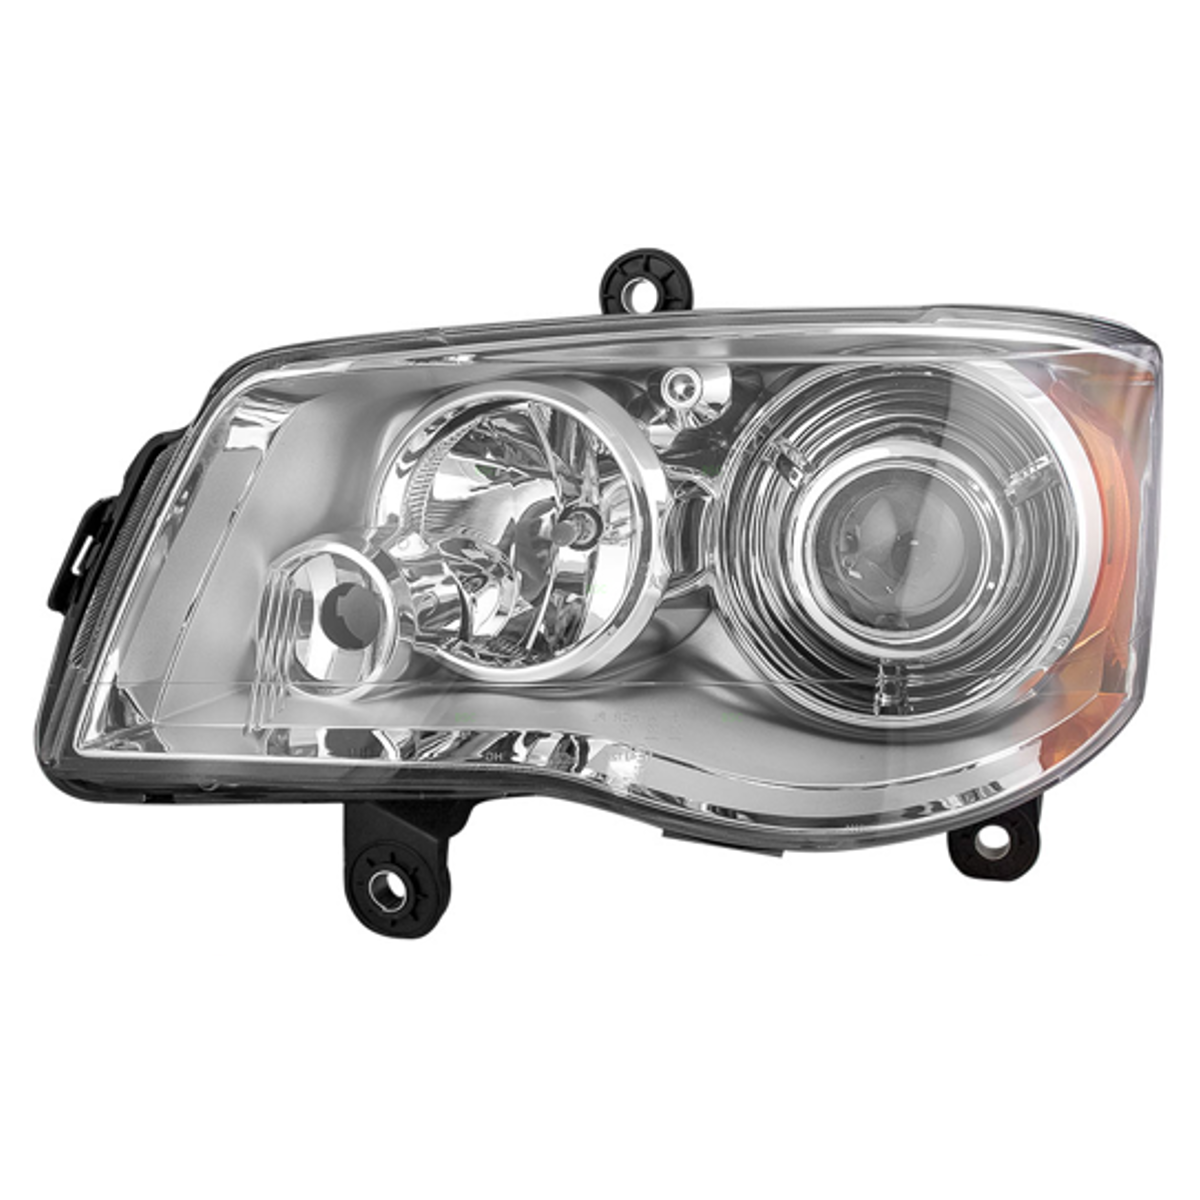 You Should Know This About Your Car Headlight Assembly